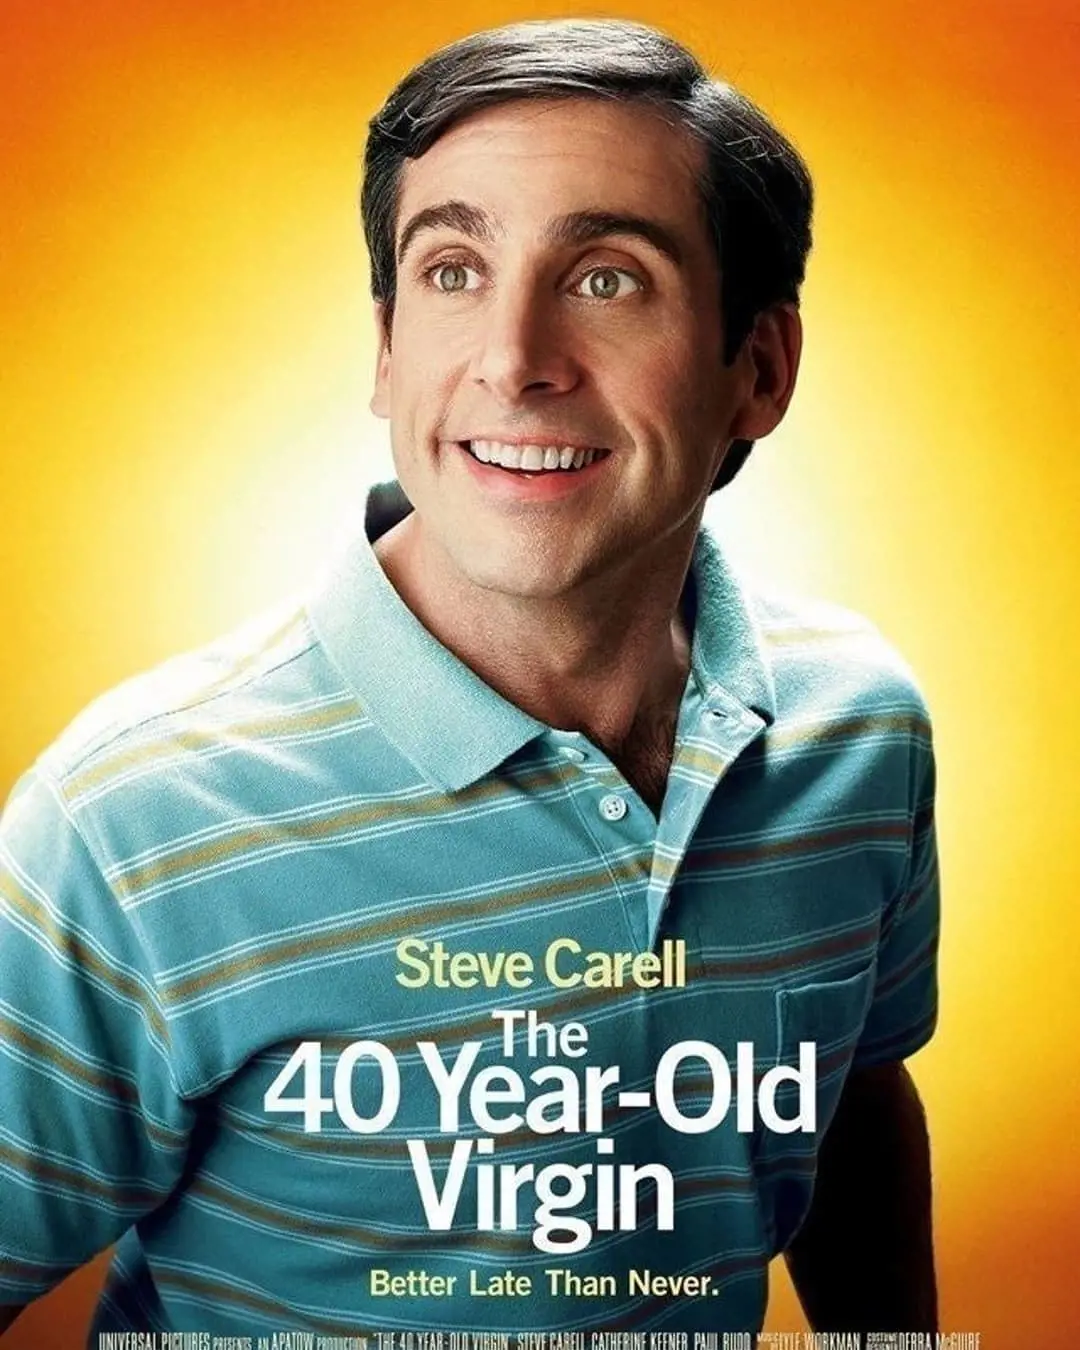 Steve Carell is the leading actor for the movie. 